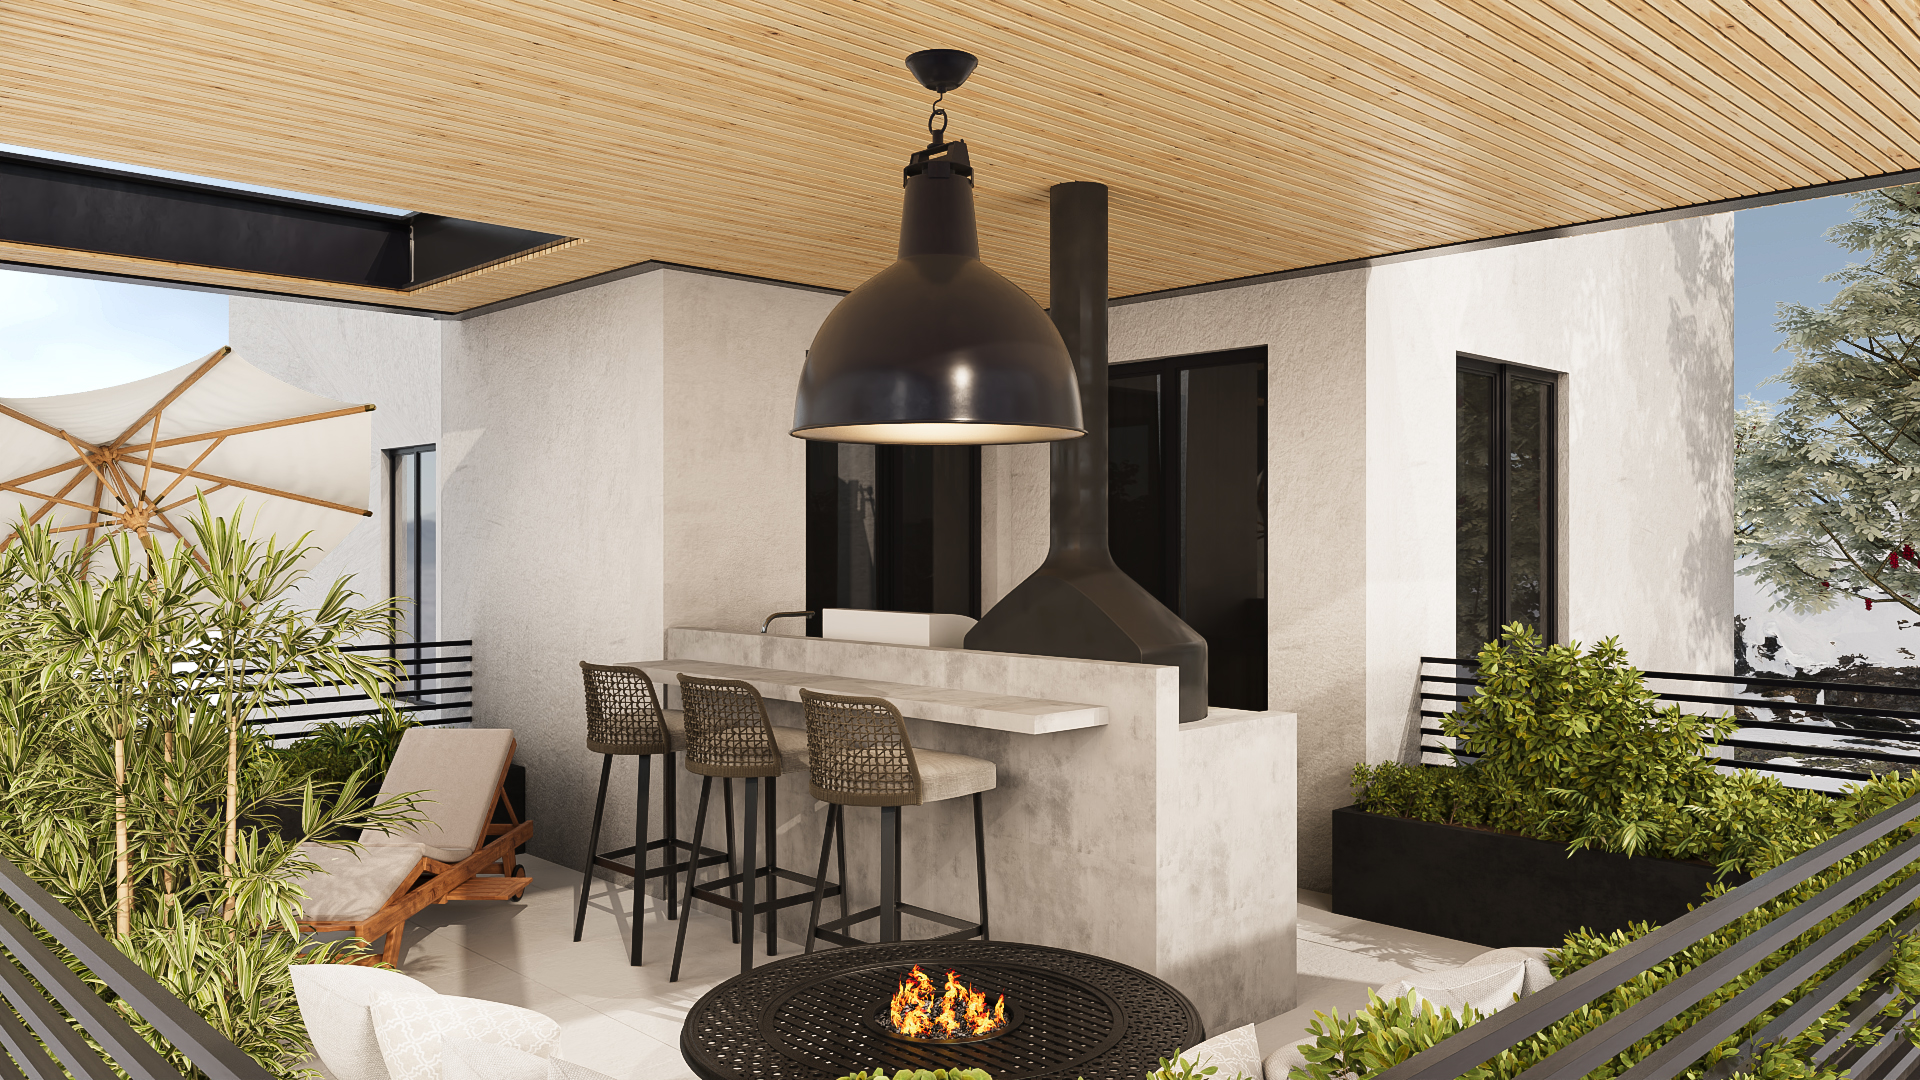 Trendy patio setup with outdoor furniture and fire pit